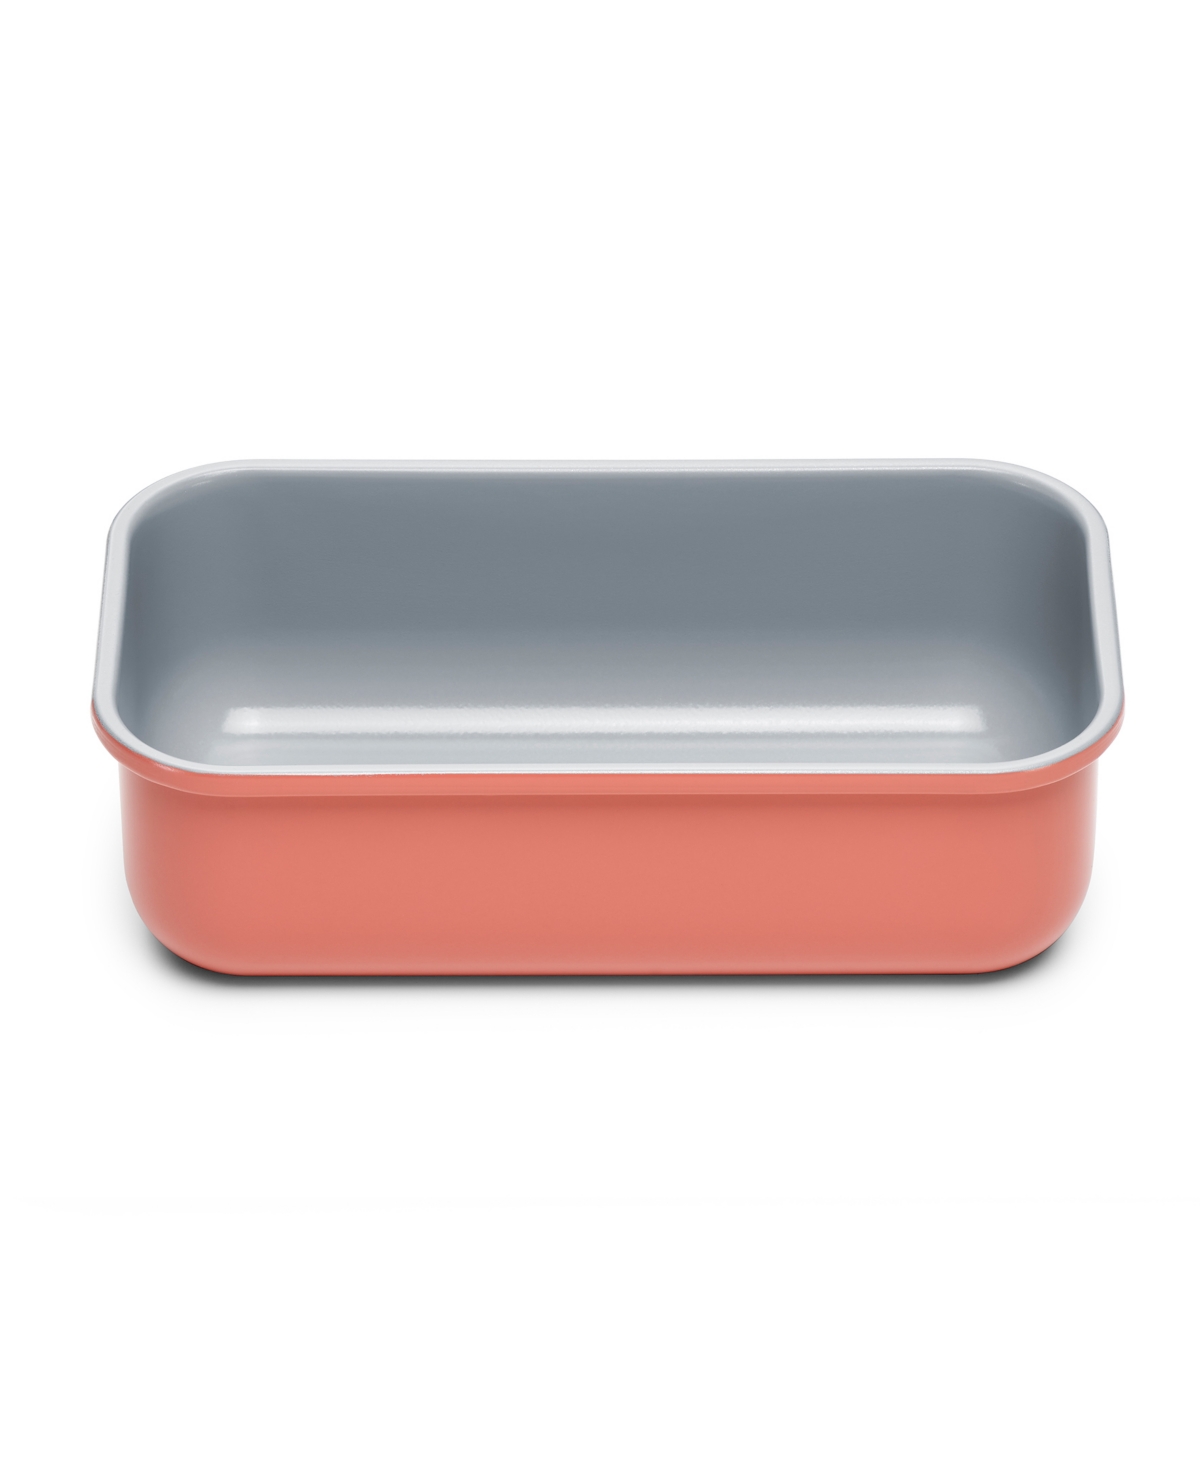 Caraway Non-stick Loaf Pan In Perracotta